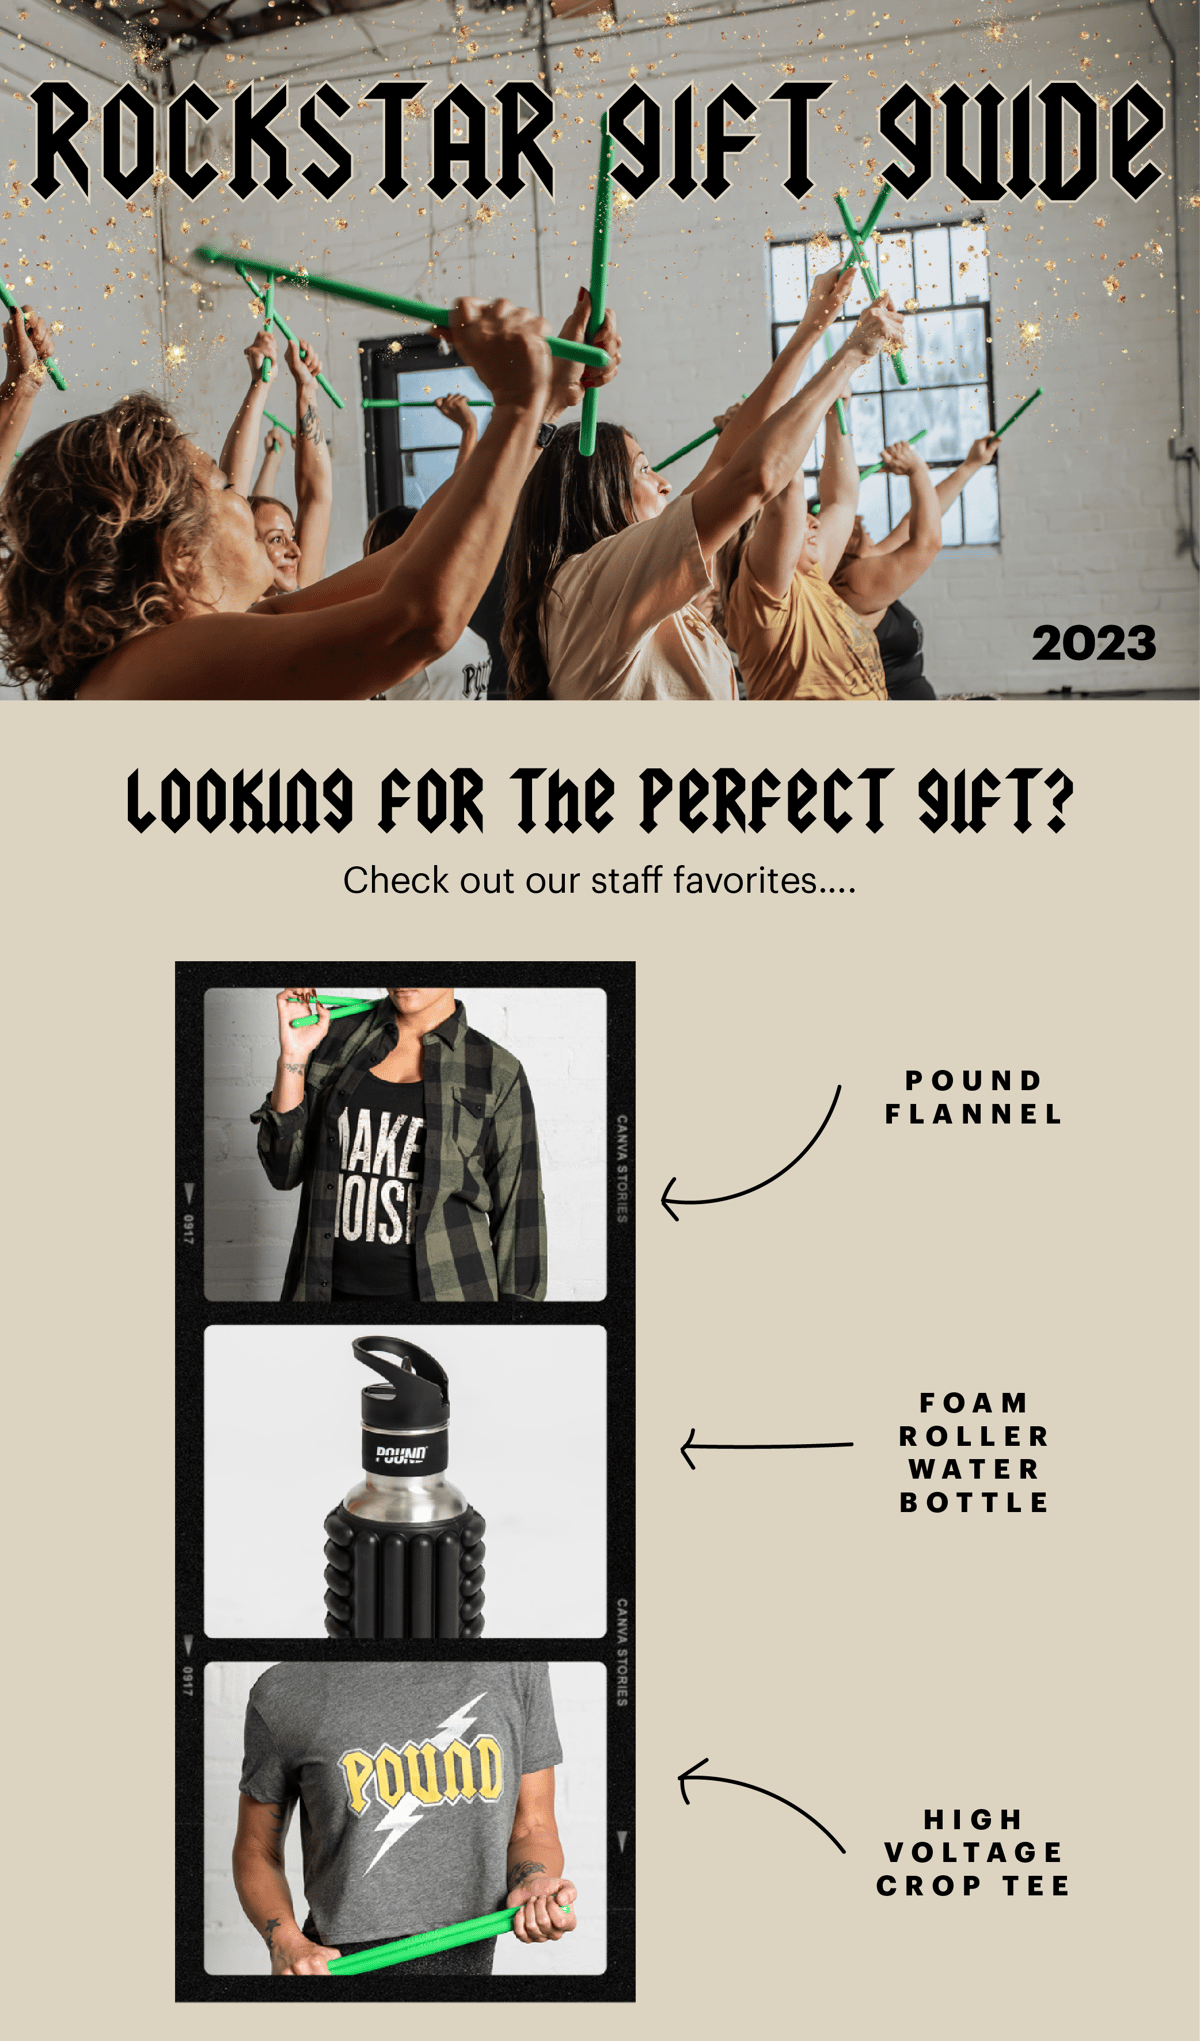  LOOKINY FOR The PBRP?CT IFT? Check out our staff favorites... POUND v , FLANNEL FOAM ROLLER WATER BOTTLE 6; HIGH VOLTAGE CROP TEE 